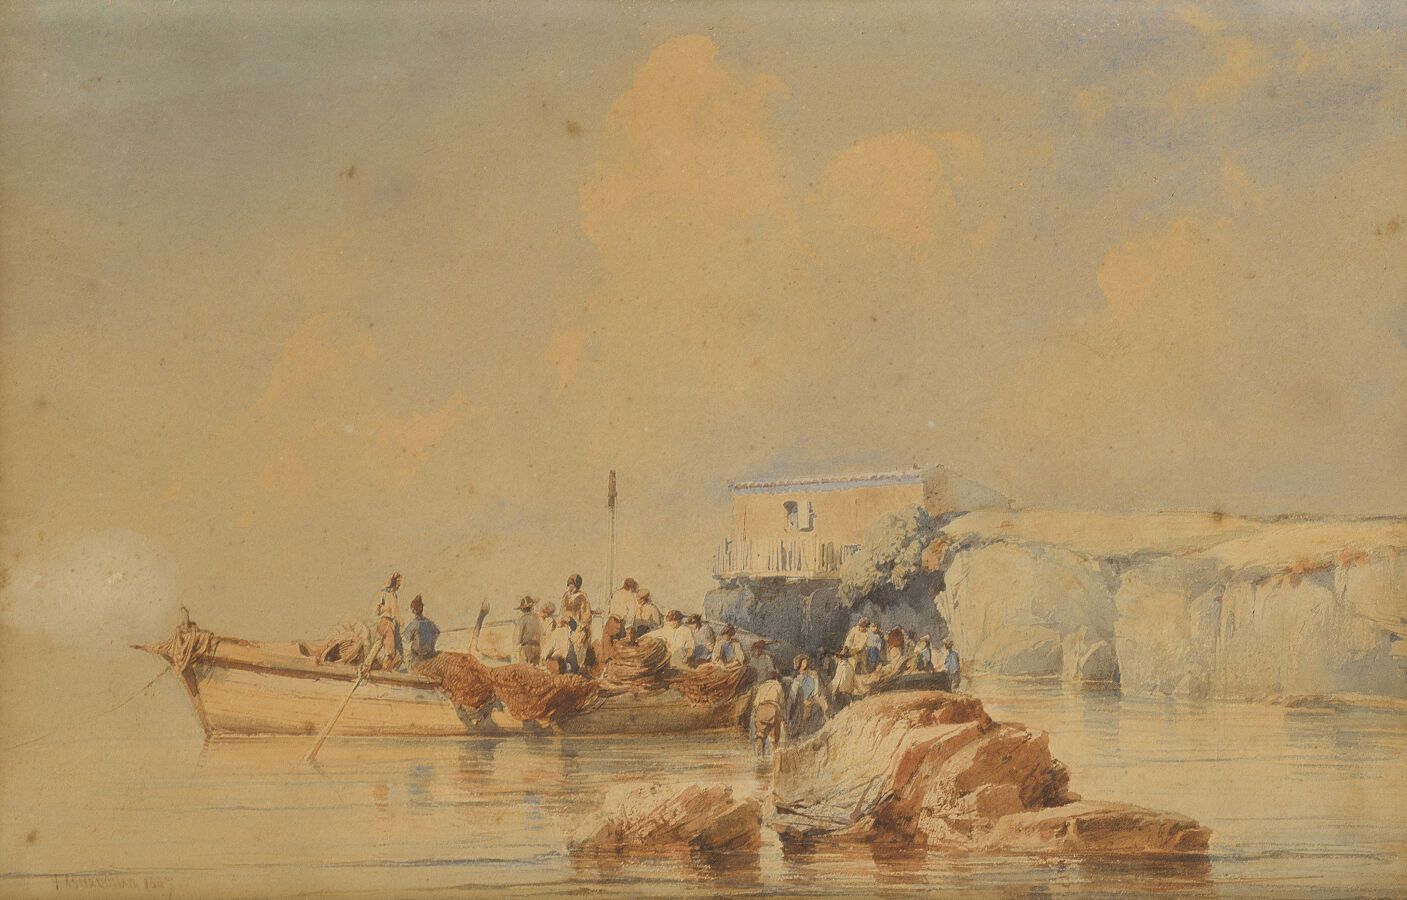 Null Vincent COURDOUA N (1810-1893)

The return of the fishermen

Watercolor, si&hellip;